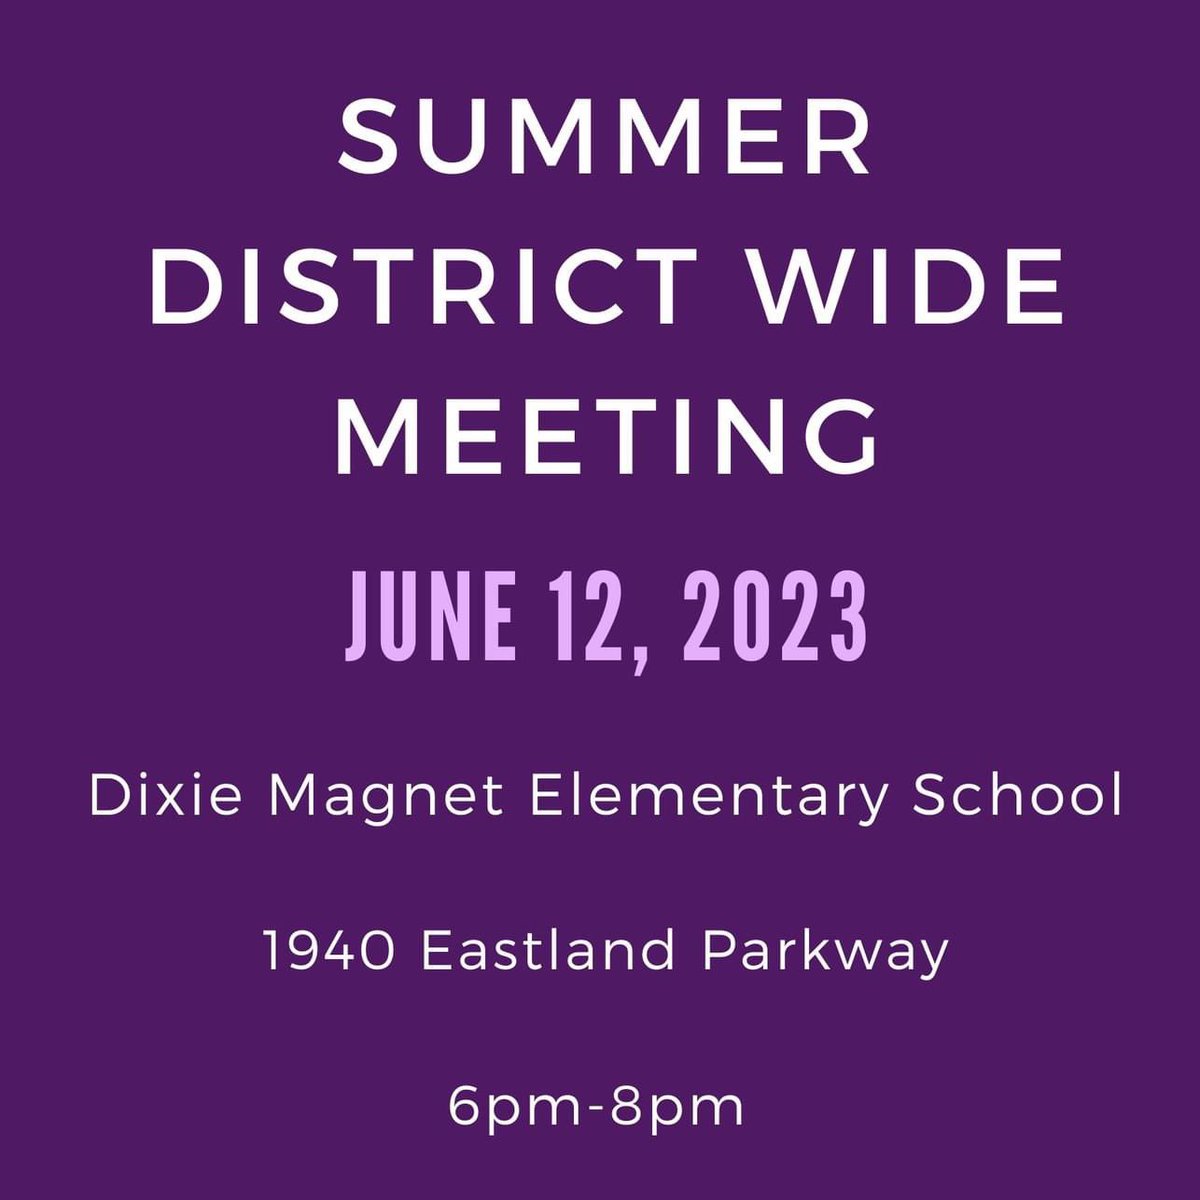 Join Councilwoman Denise Gray and others TONIGHT for the Summer 6th District-Wide meeting. Find more info at this link: facebook.com/events/9351711…